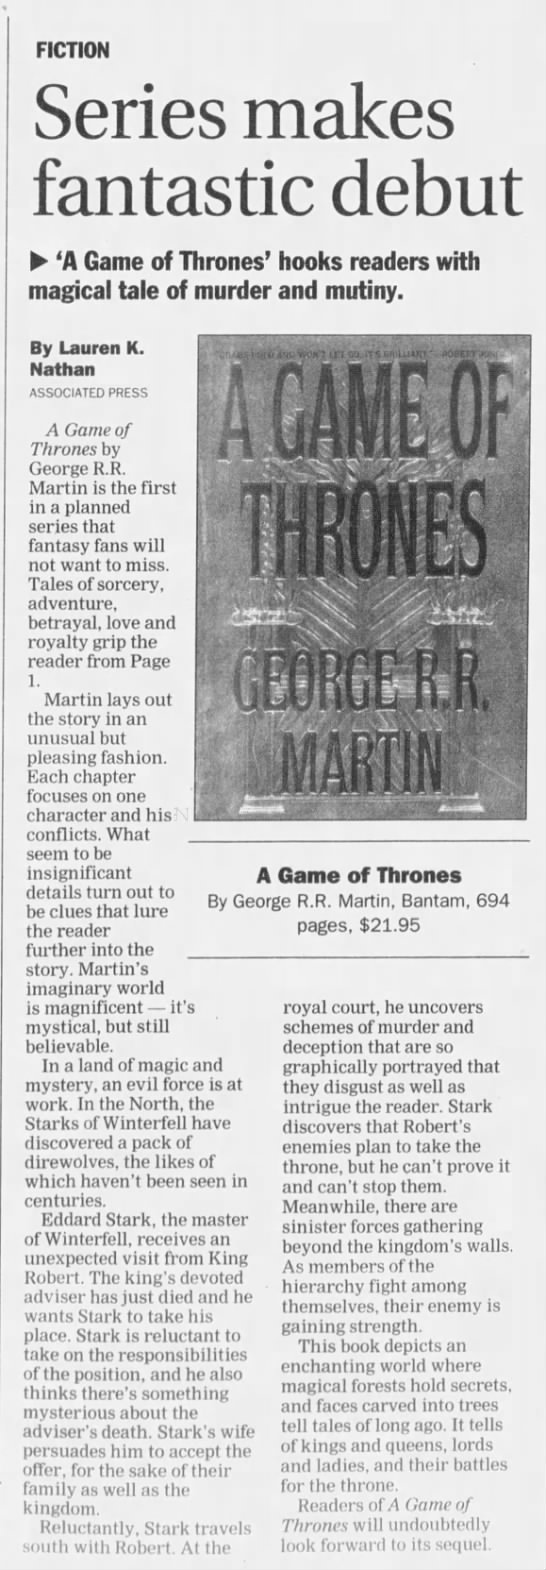 A Game of Thrones - 1996 review of series debut - 